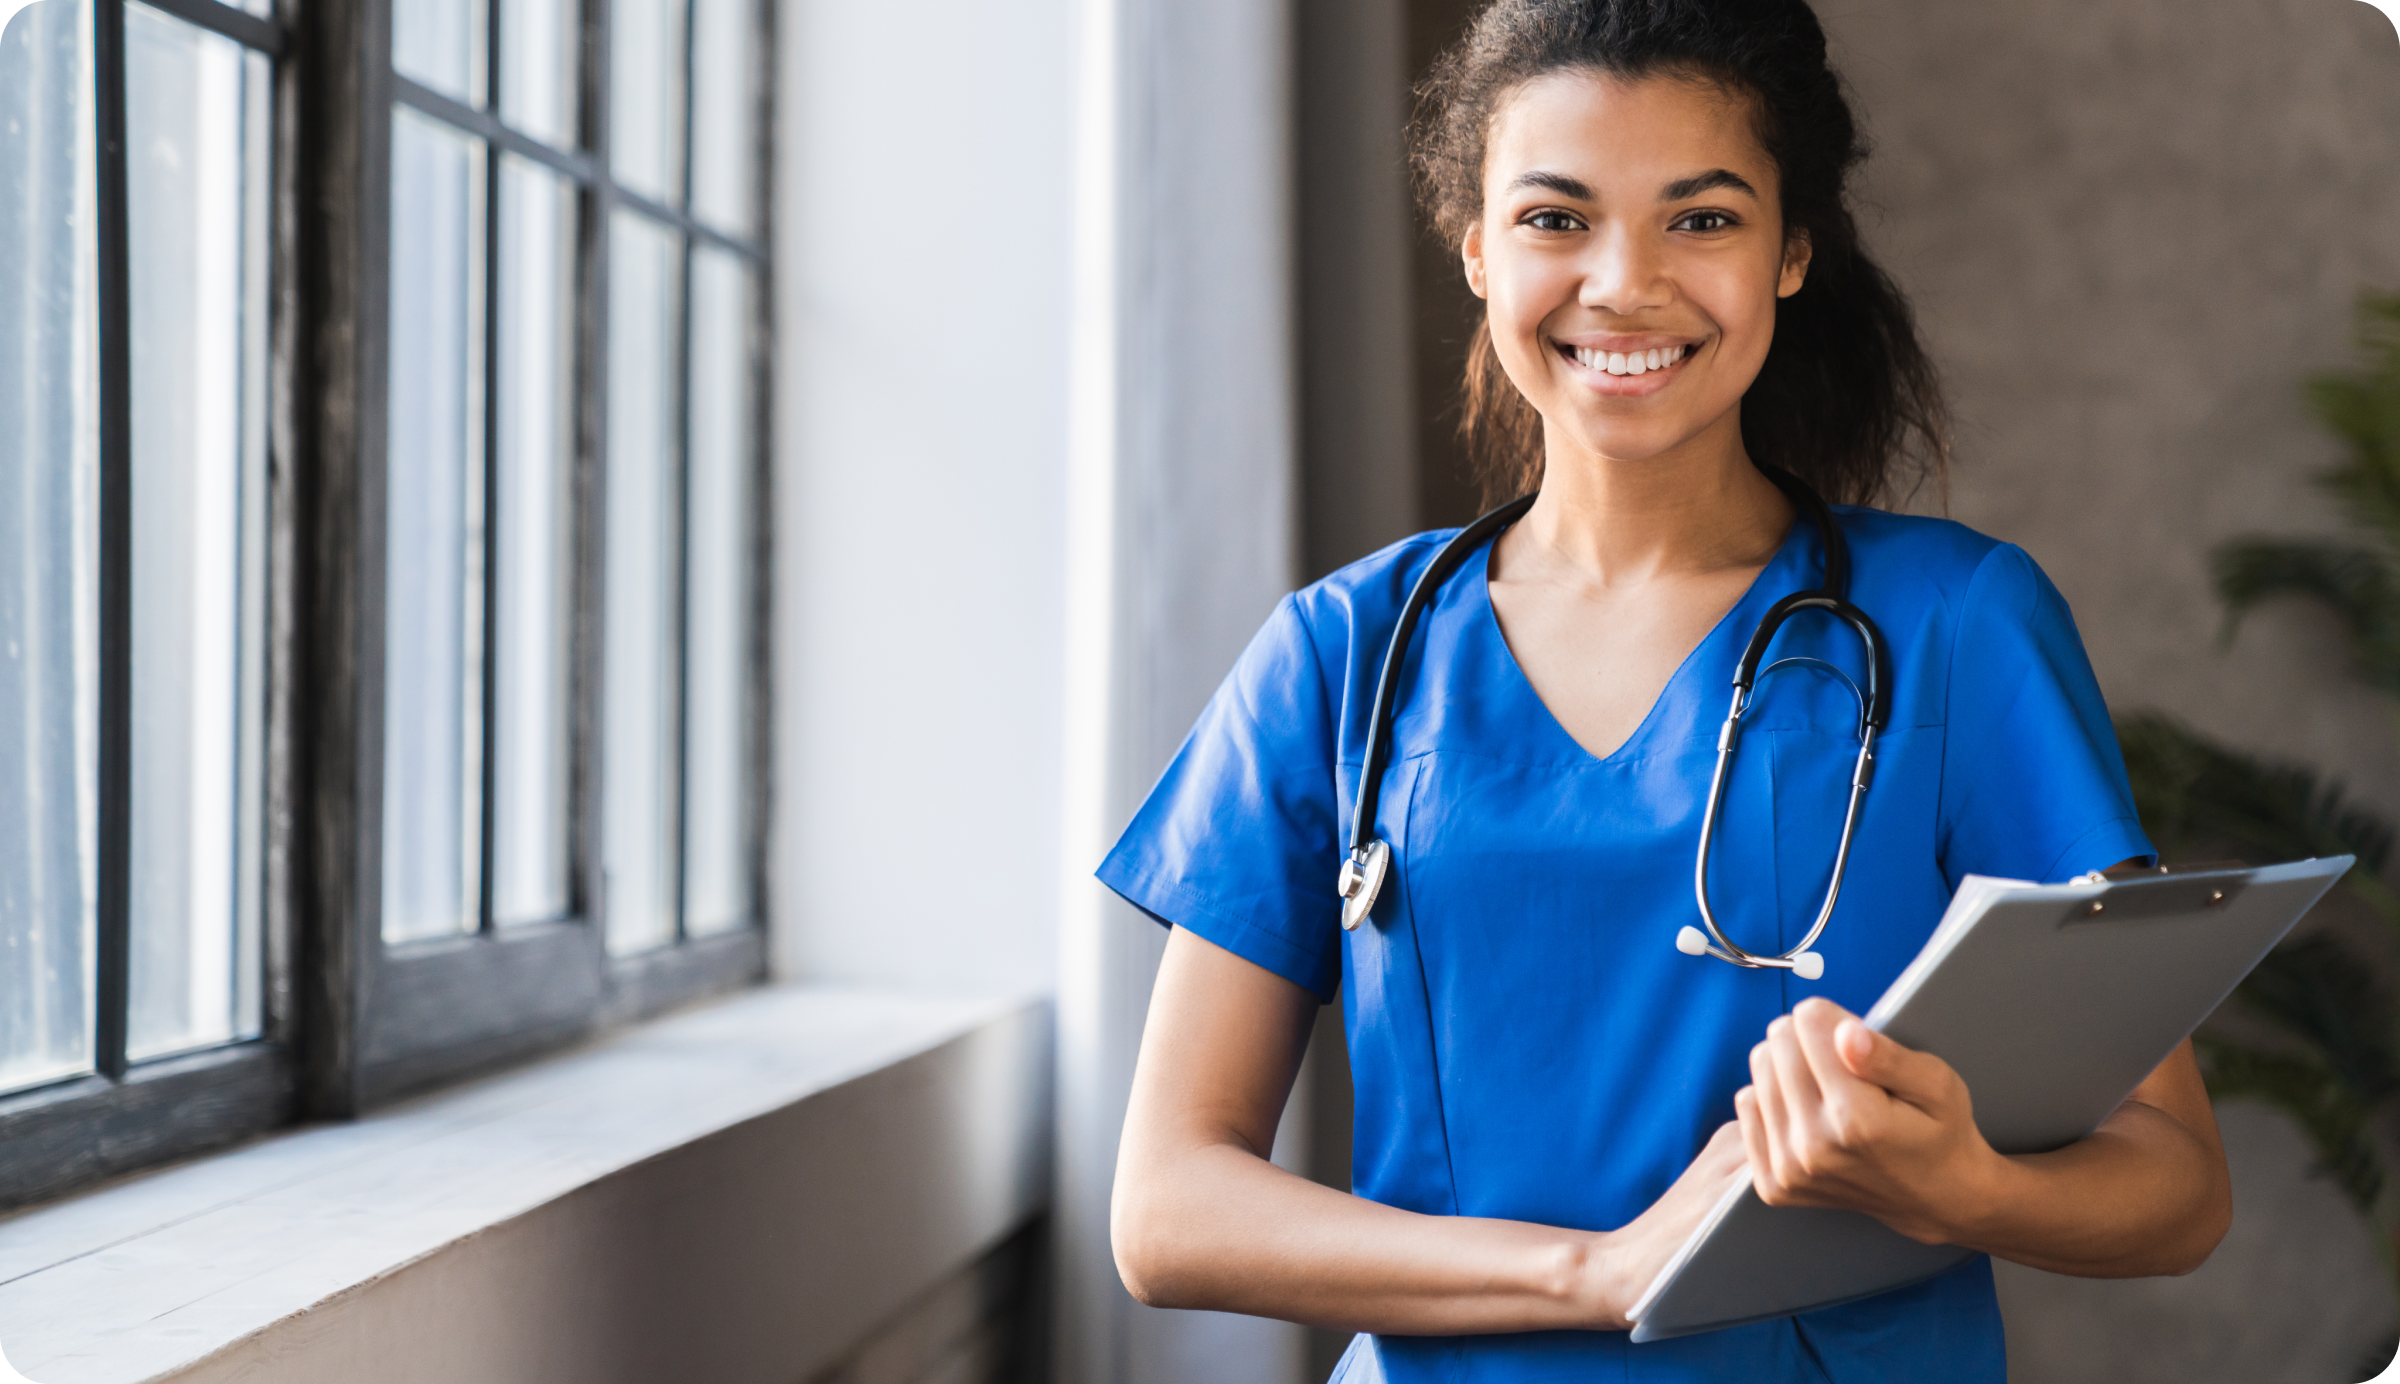 Prepare and Inspire Nursing Students to Make a Positive Impact in Healthcare